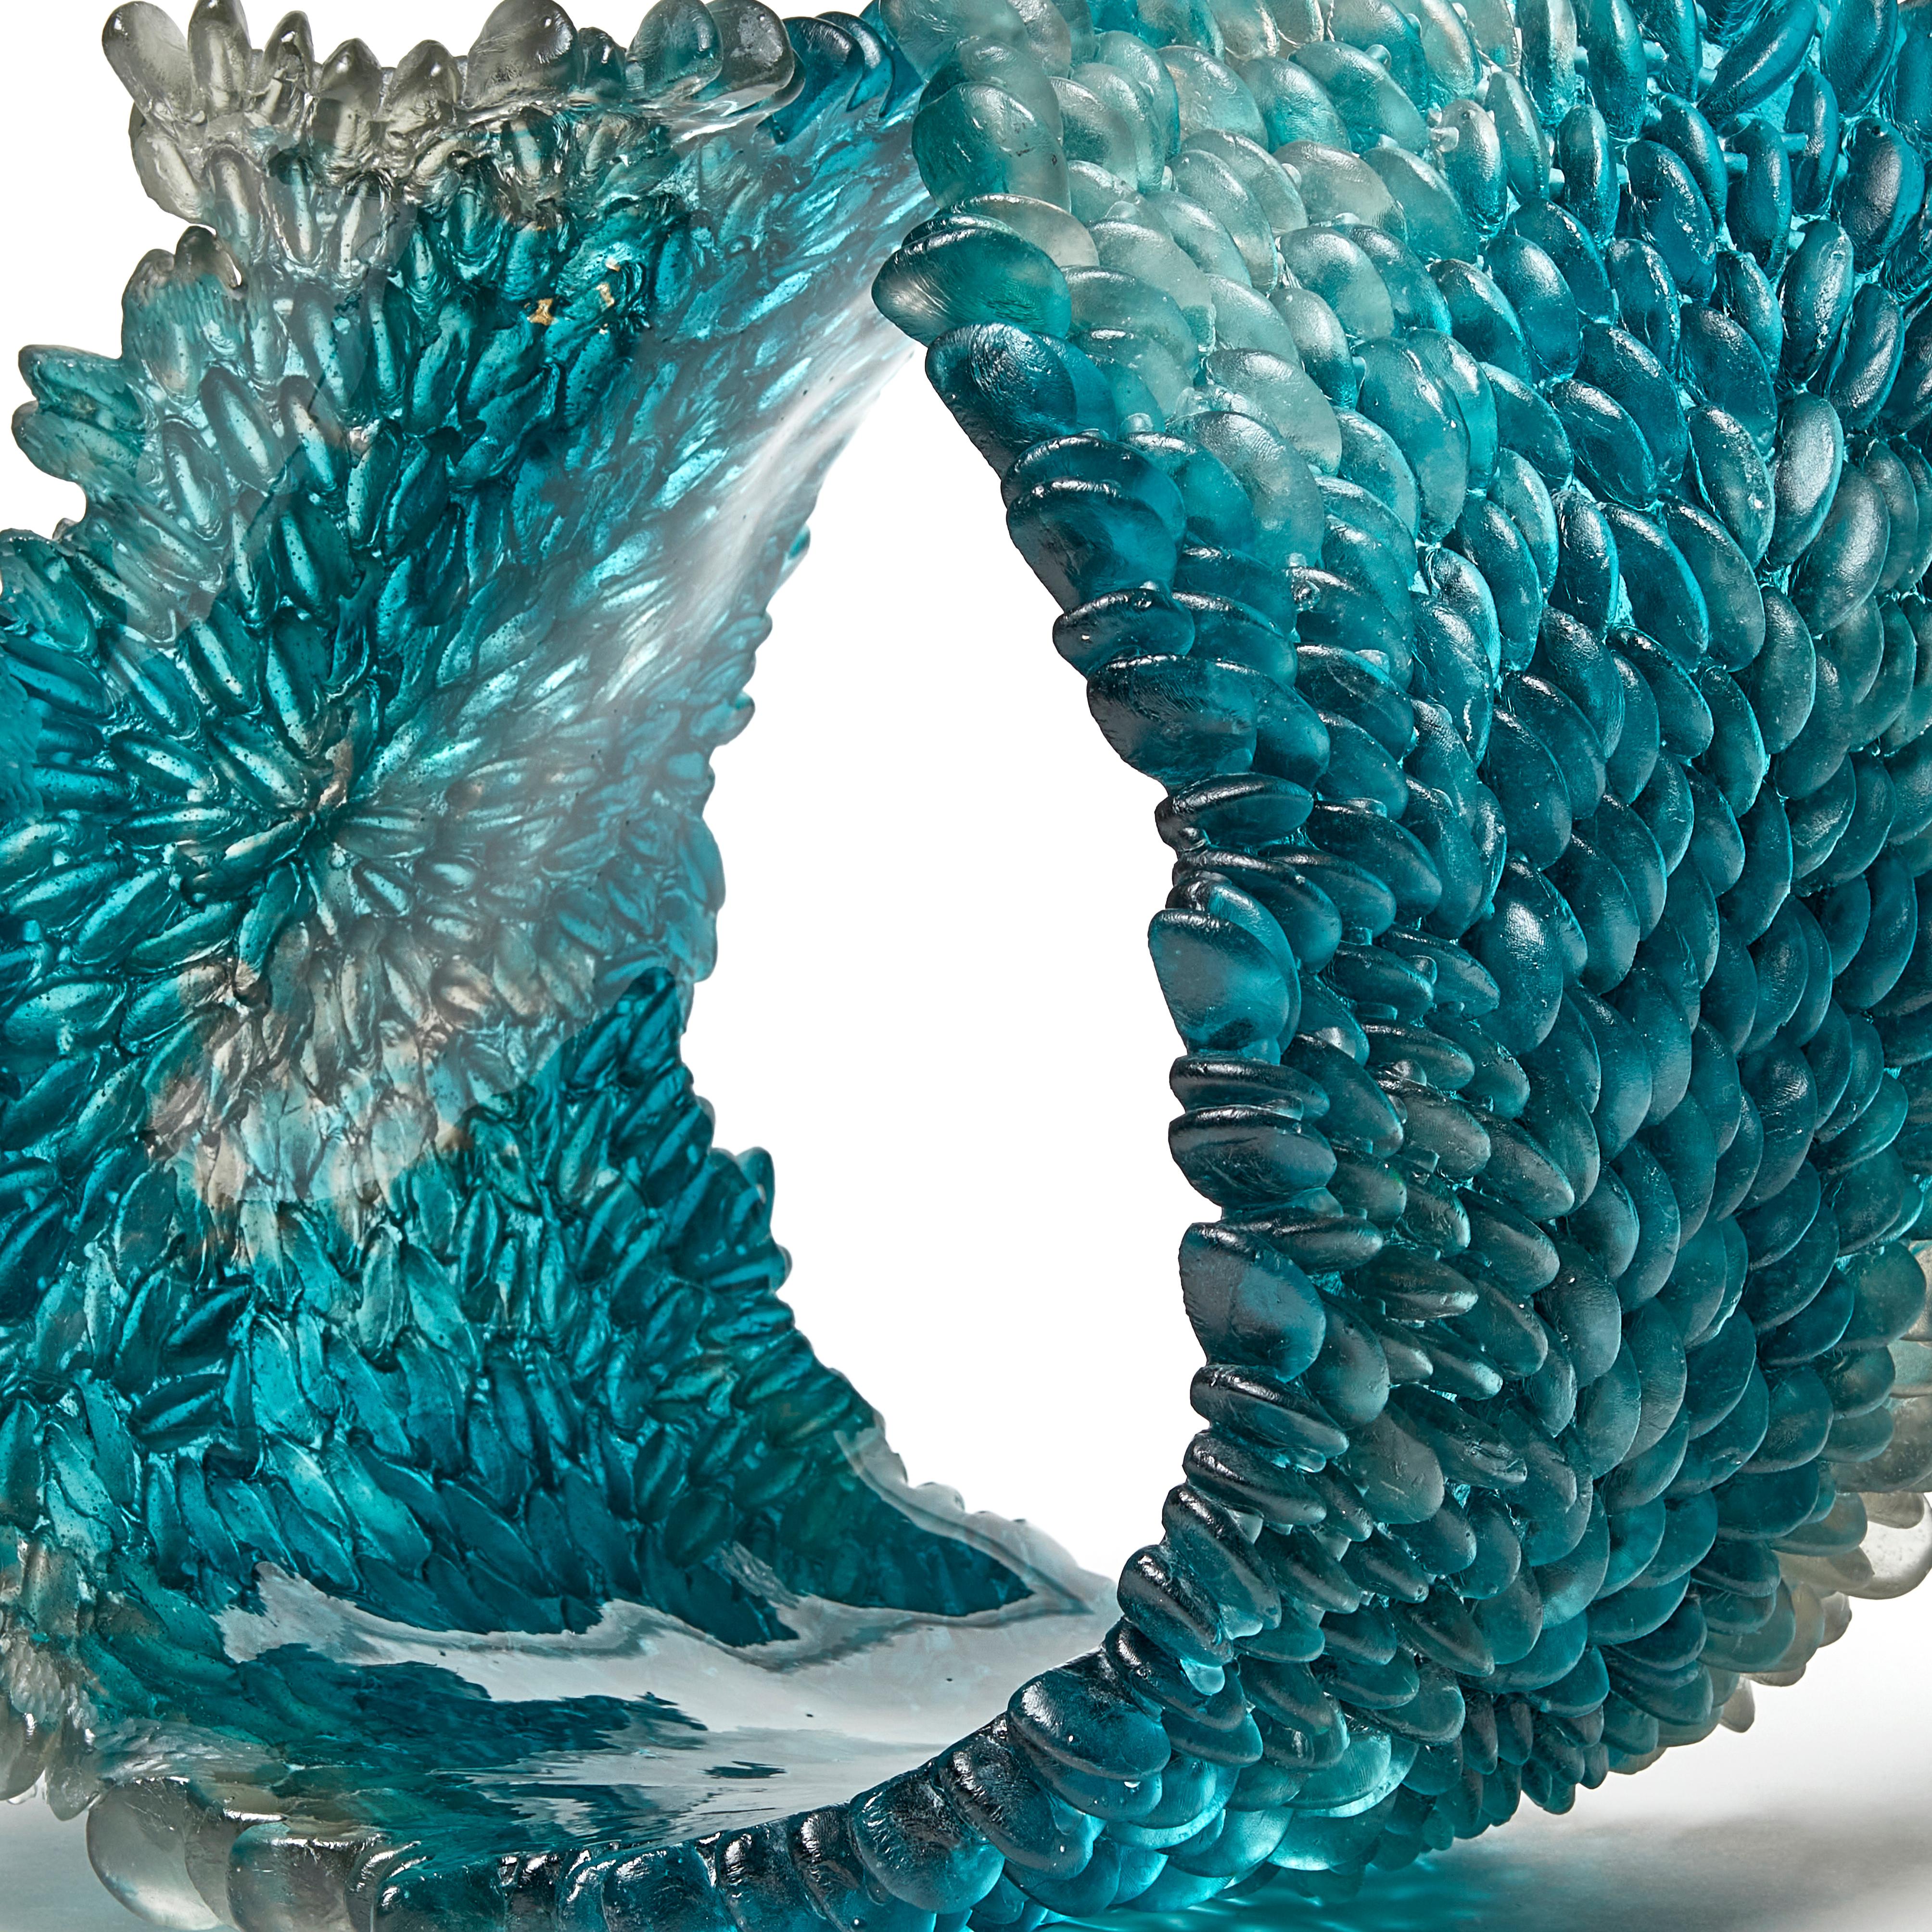 British Curled Over IV, Unique Glass Sculpture in teal & grey by Nina Casson McGarva